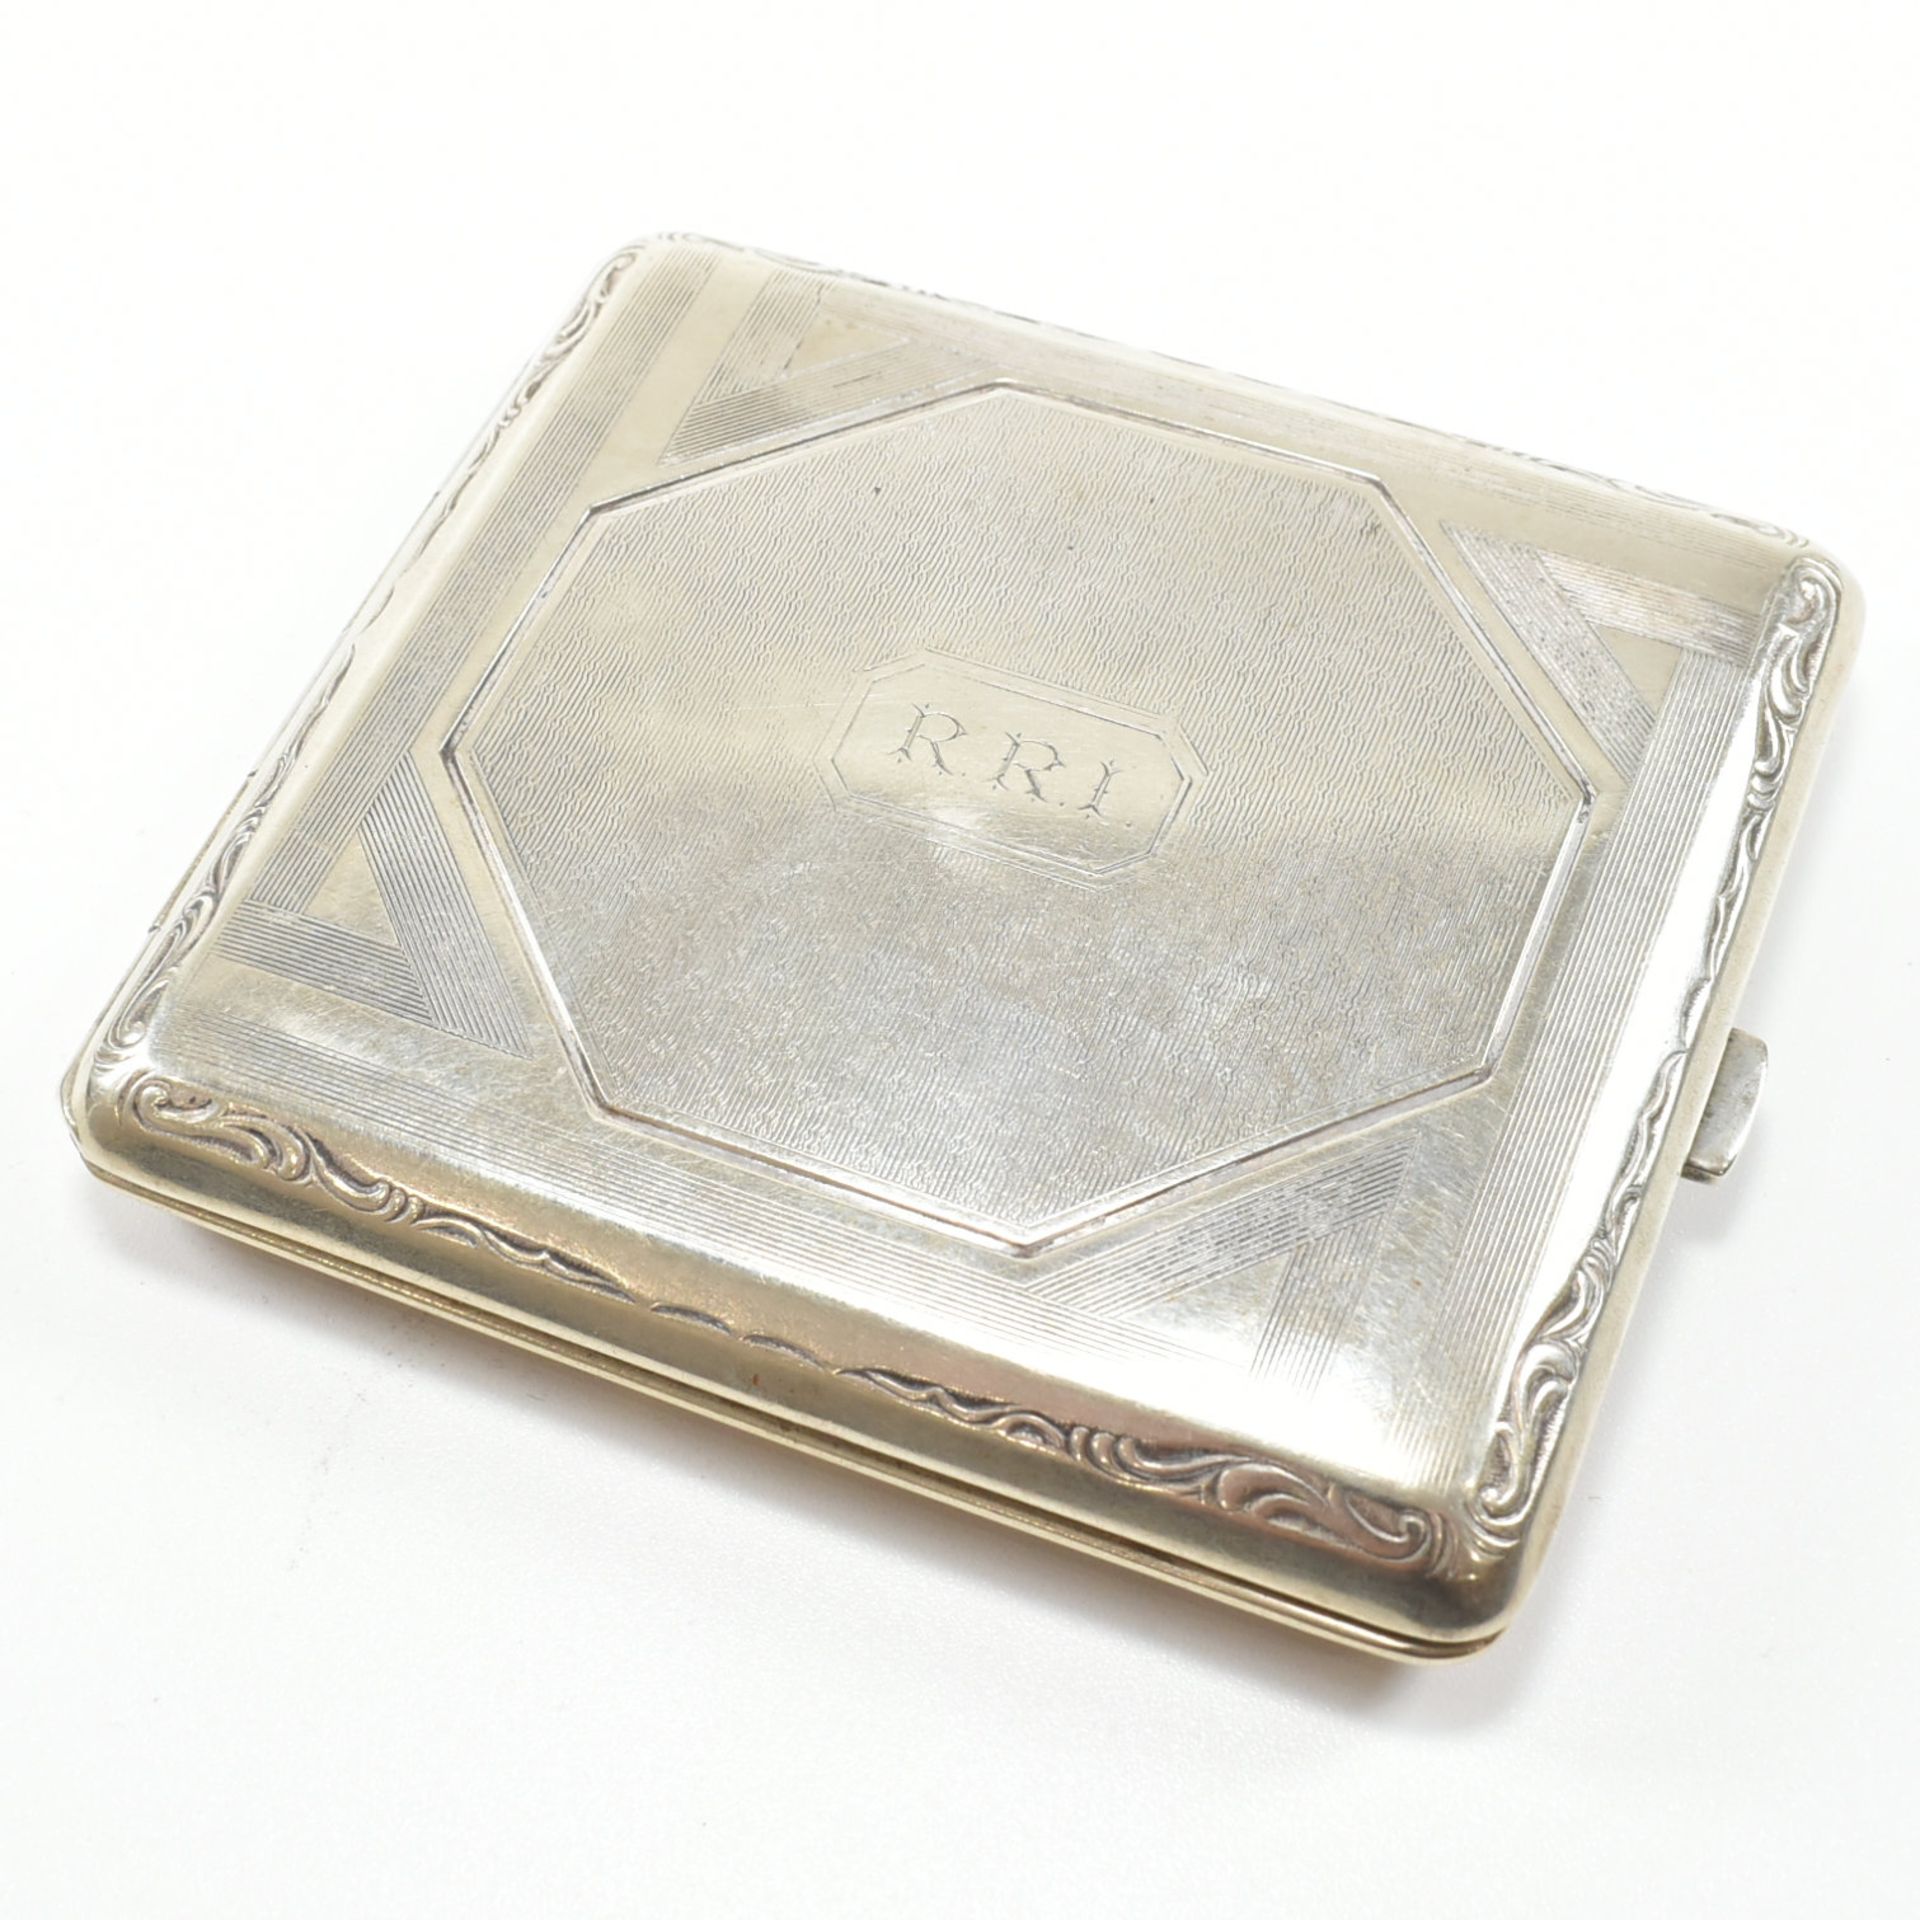 COLLECTION OF 20TH CENTURY SILVER PLATE WHITE METAL & ALPACCA CIGARETTE CASES - Image 14 of 15